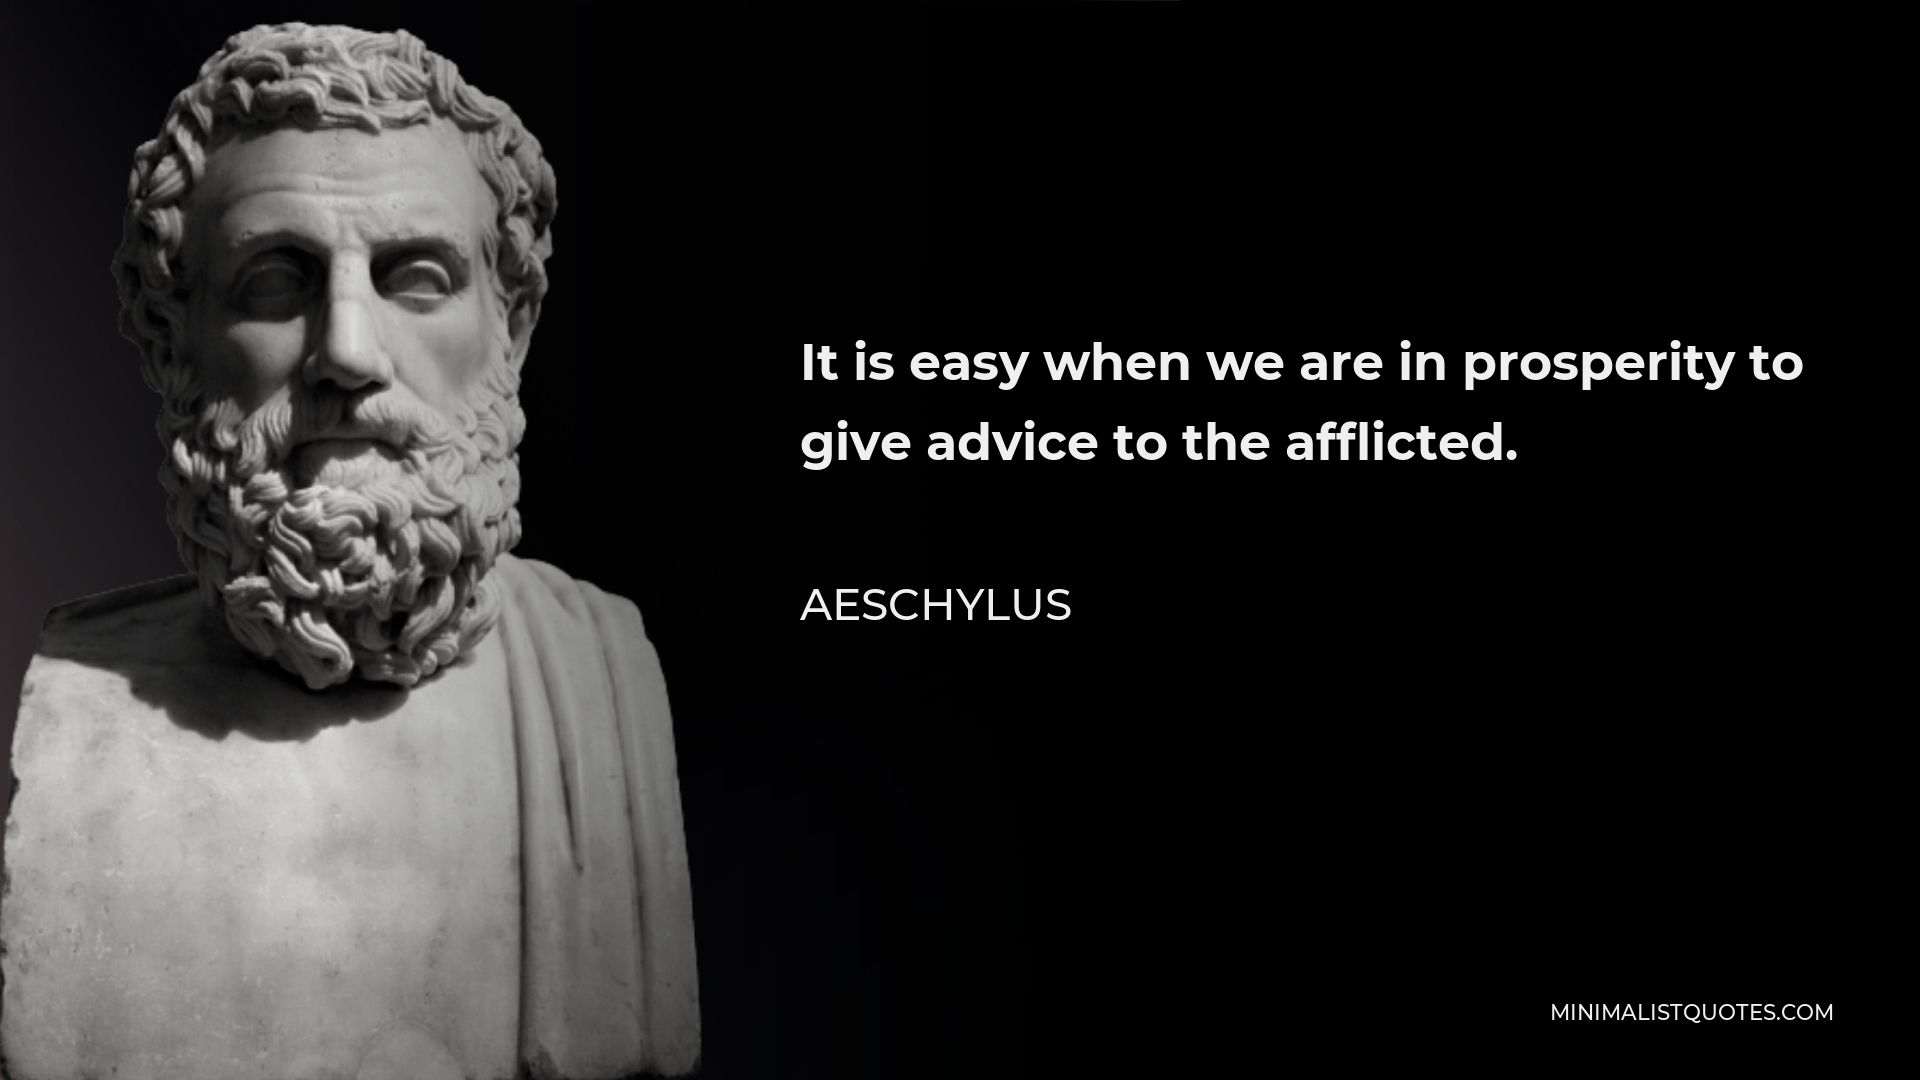 Aeschylus Quote - It is easy when we are in prosperity to give advice to the afflicted.